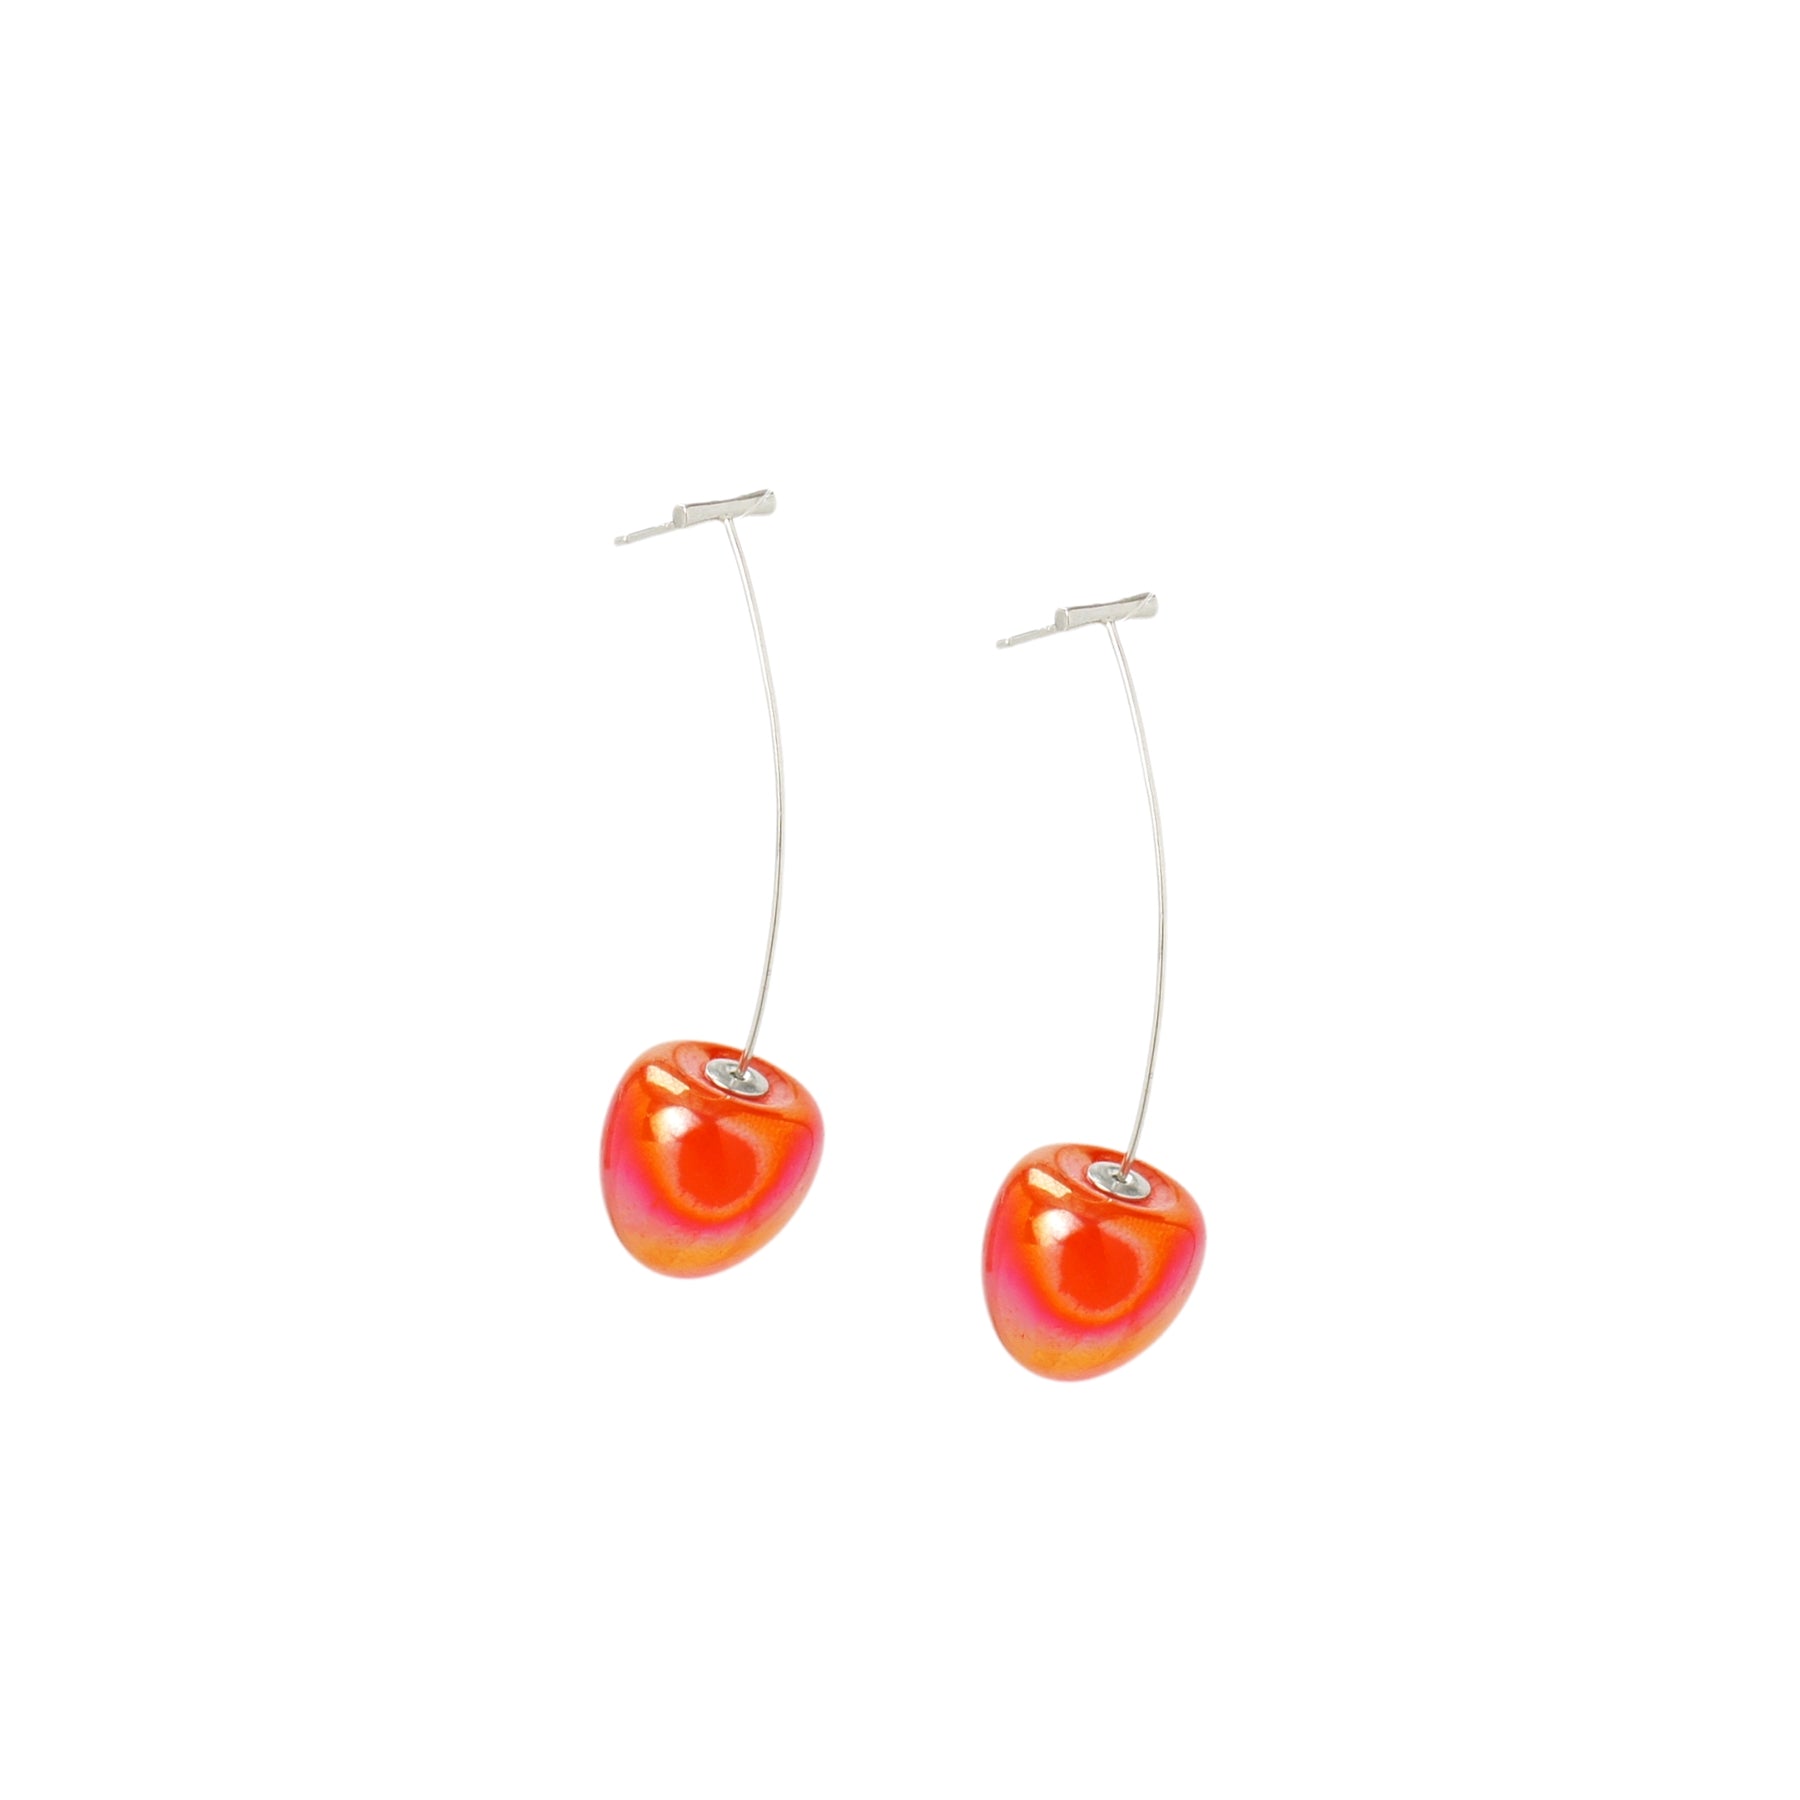 Iridescent Cherry Drop Earrings with Sterling Silver Stems